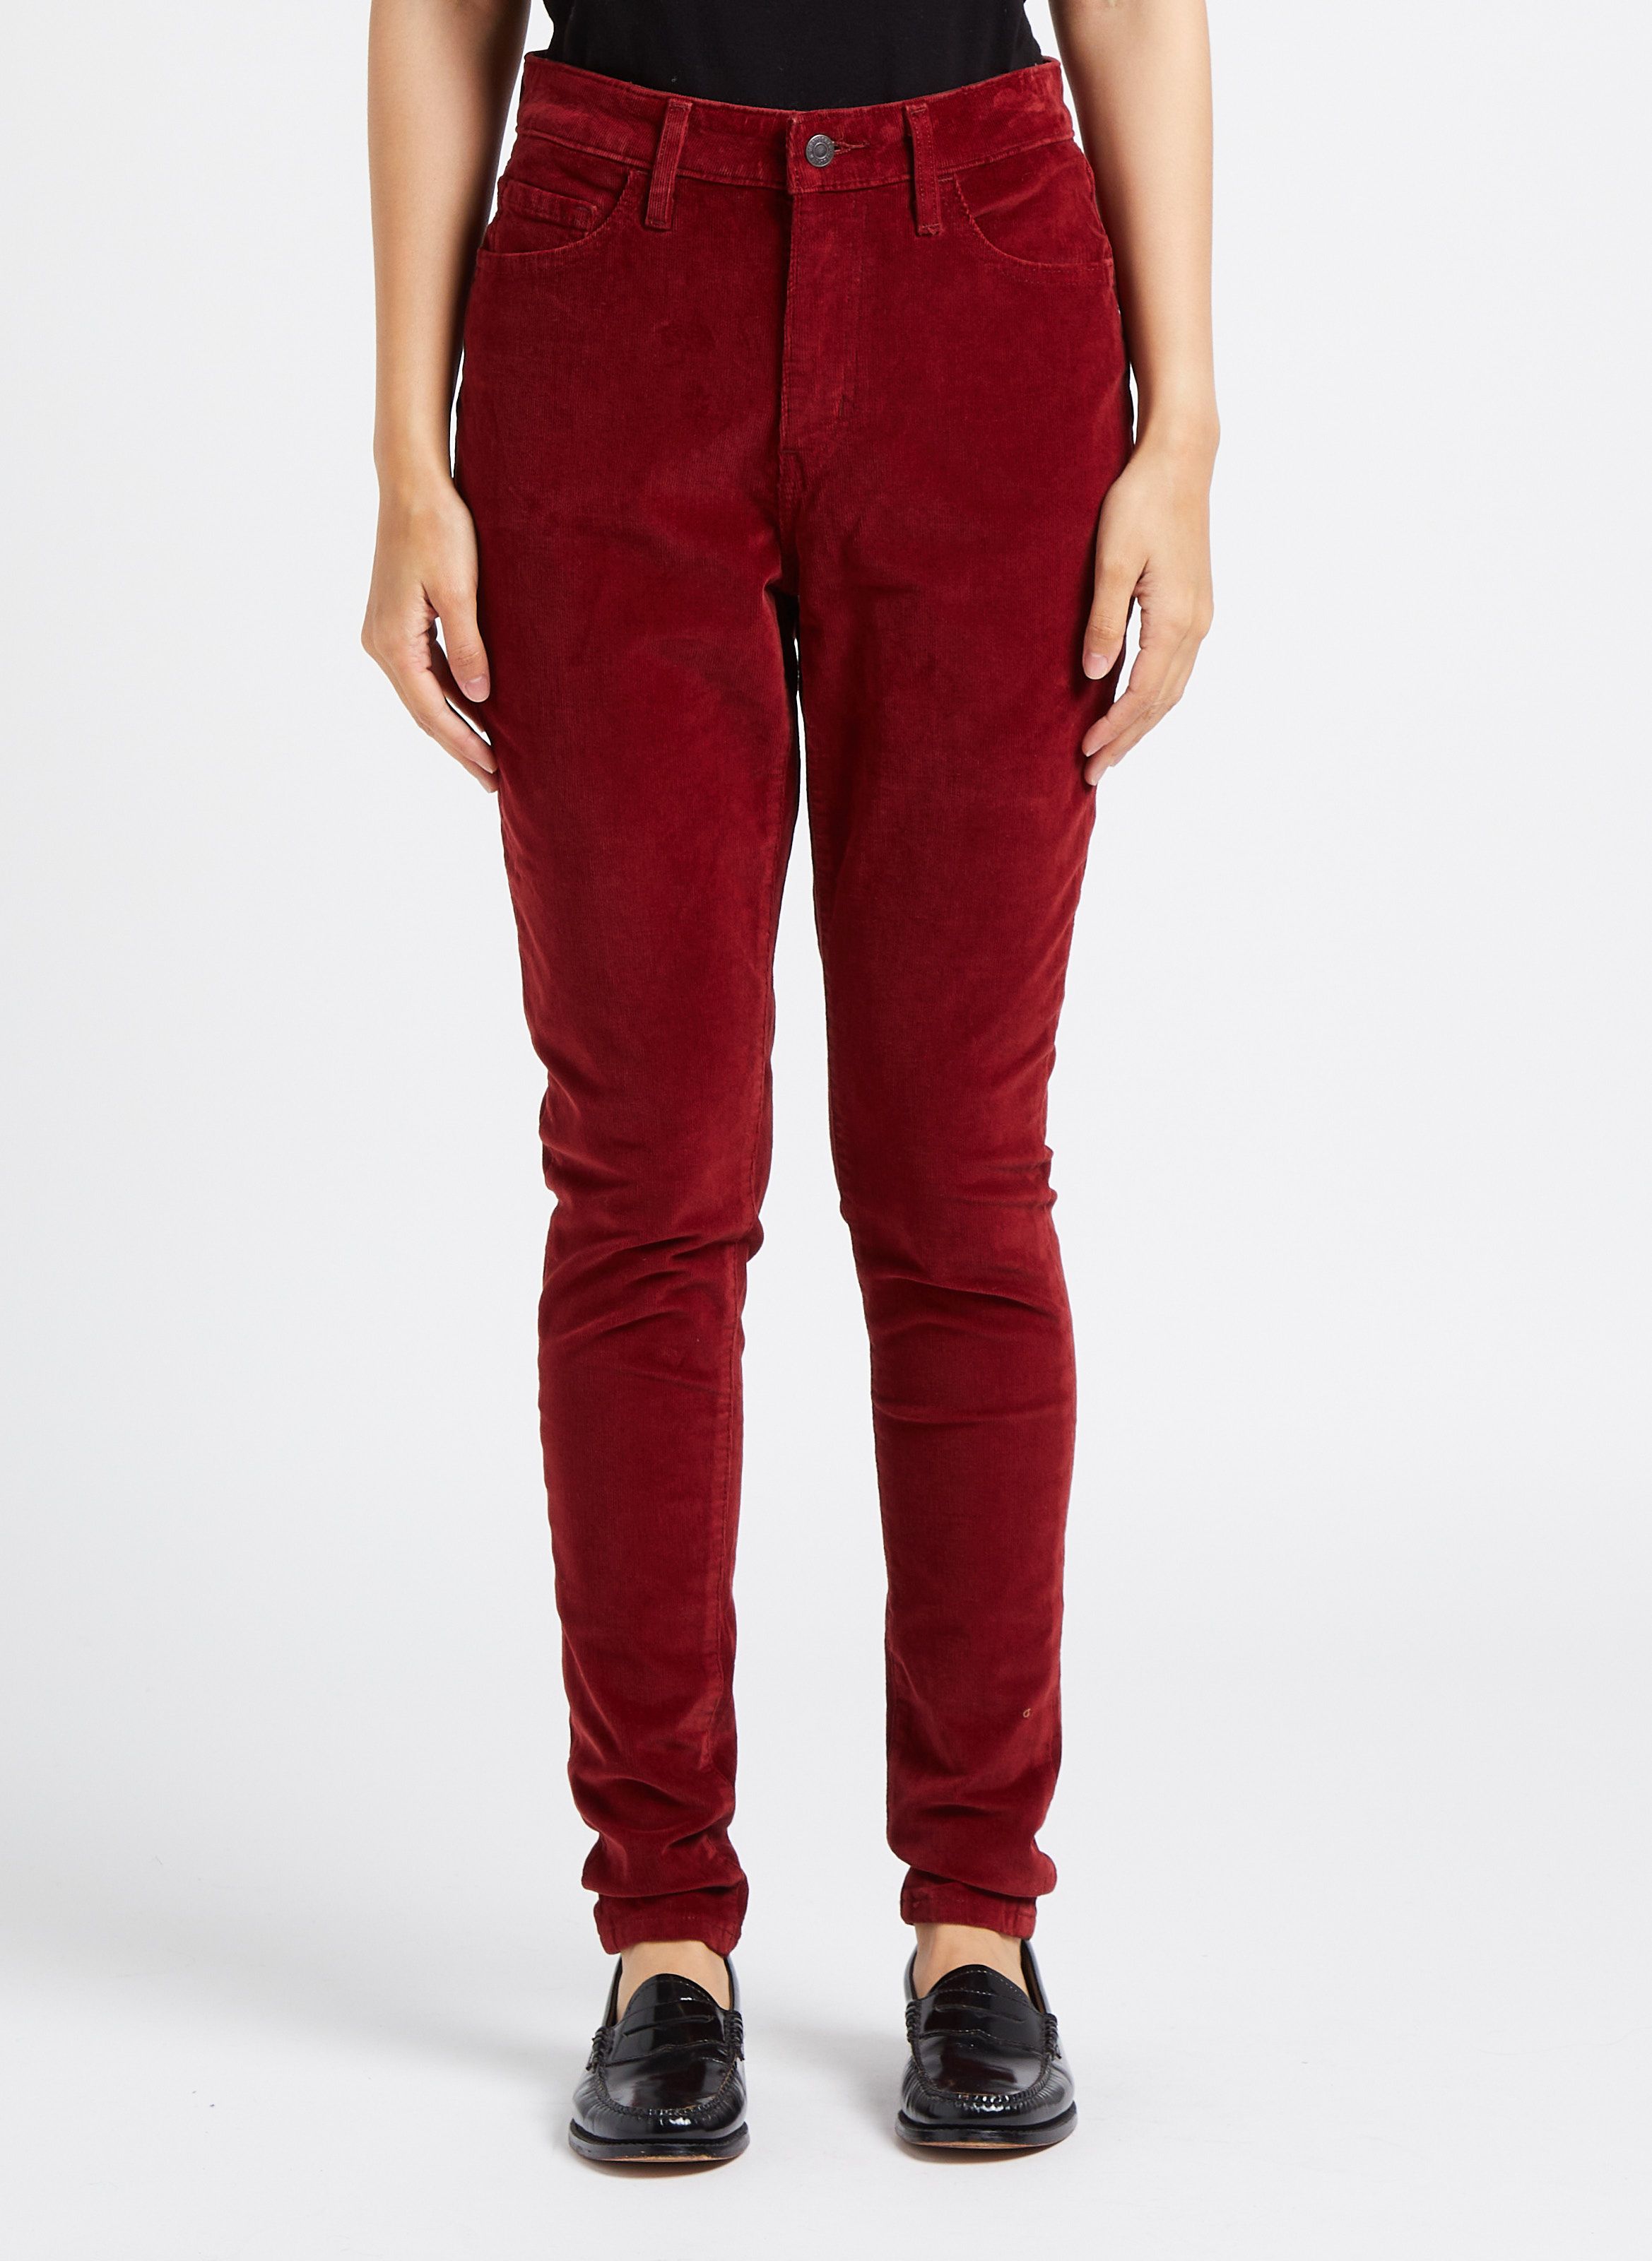 721 Corduroy High Rise Button Front Skinny Women's Pants - Red | Levi's® US